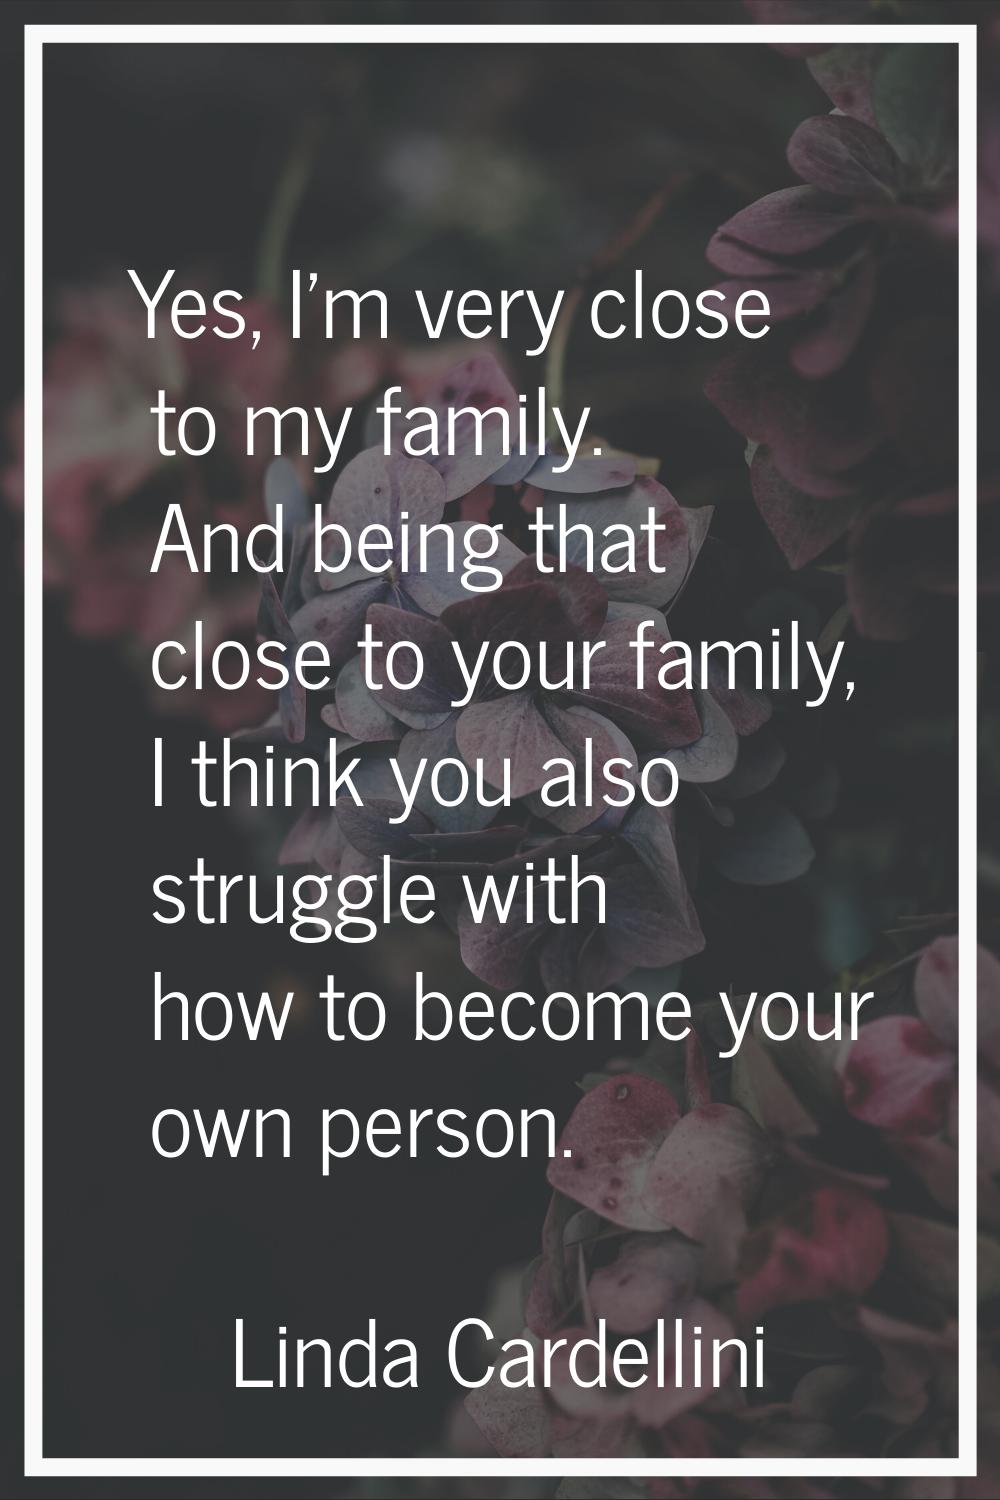 Yes, I'm very close to my family. And being that close to your family, I think you also struggle wi